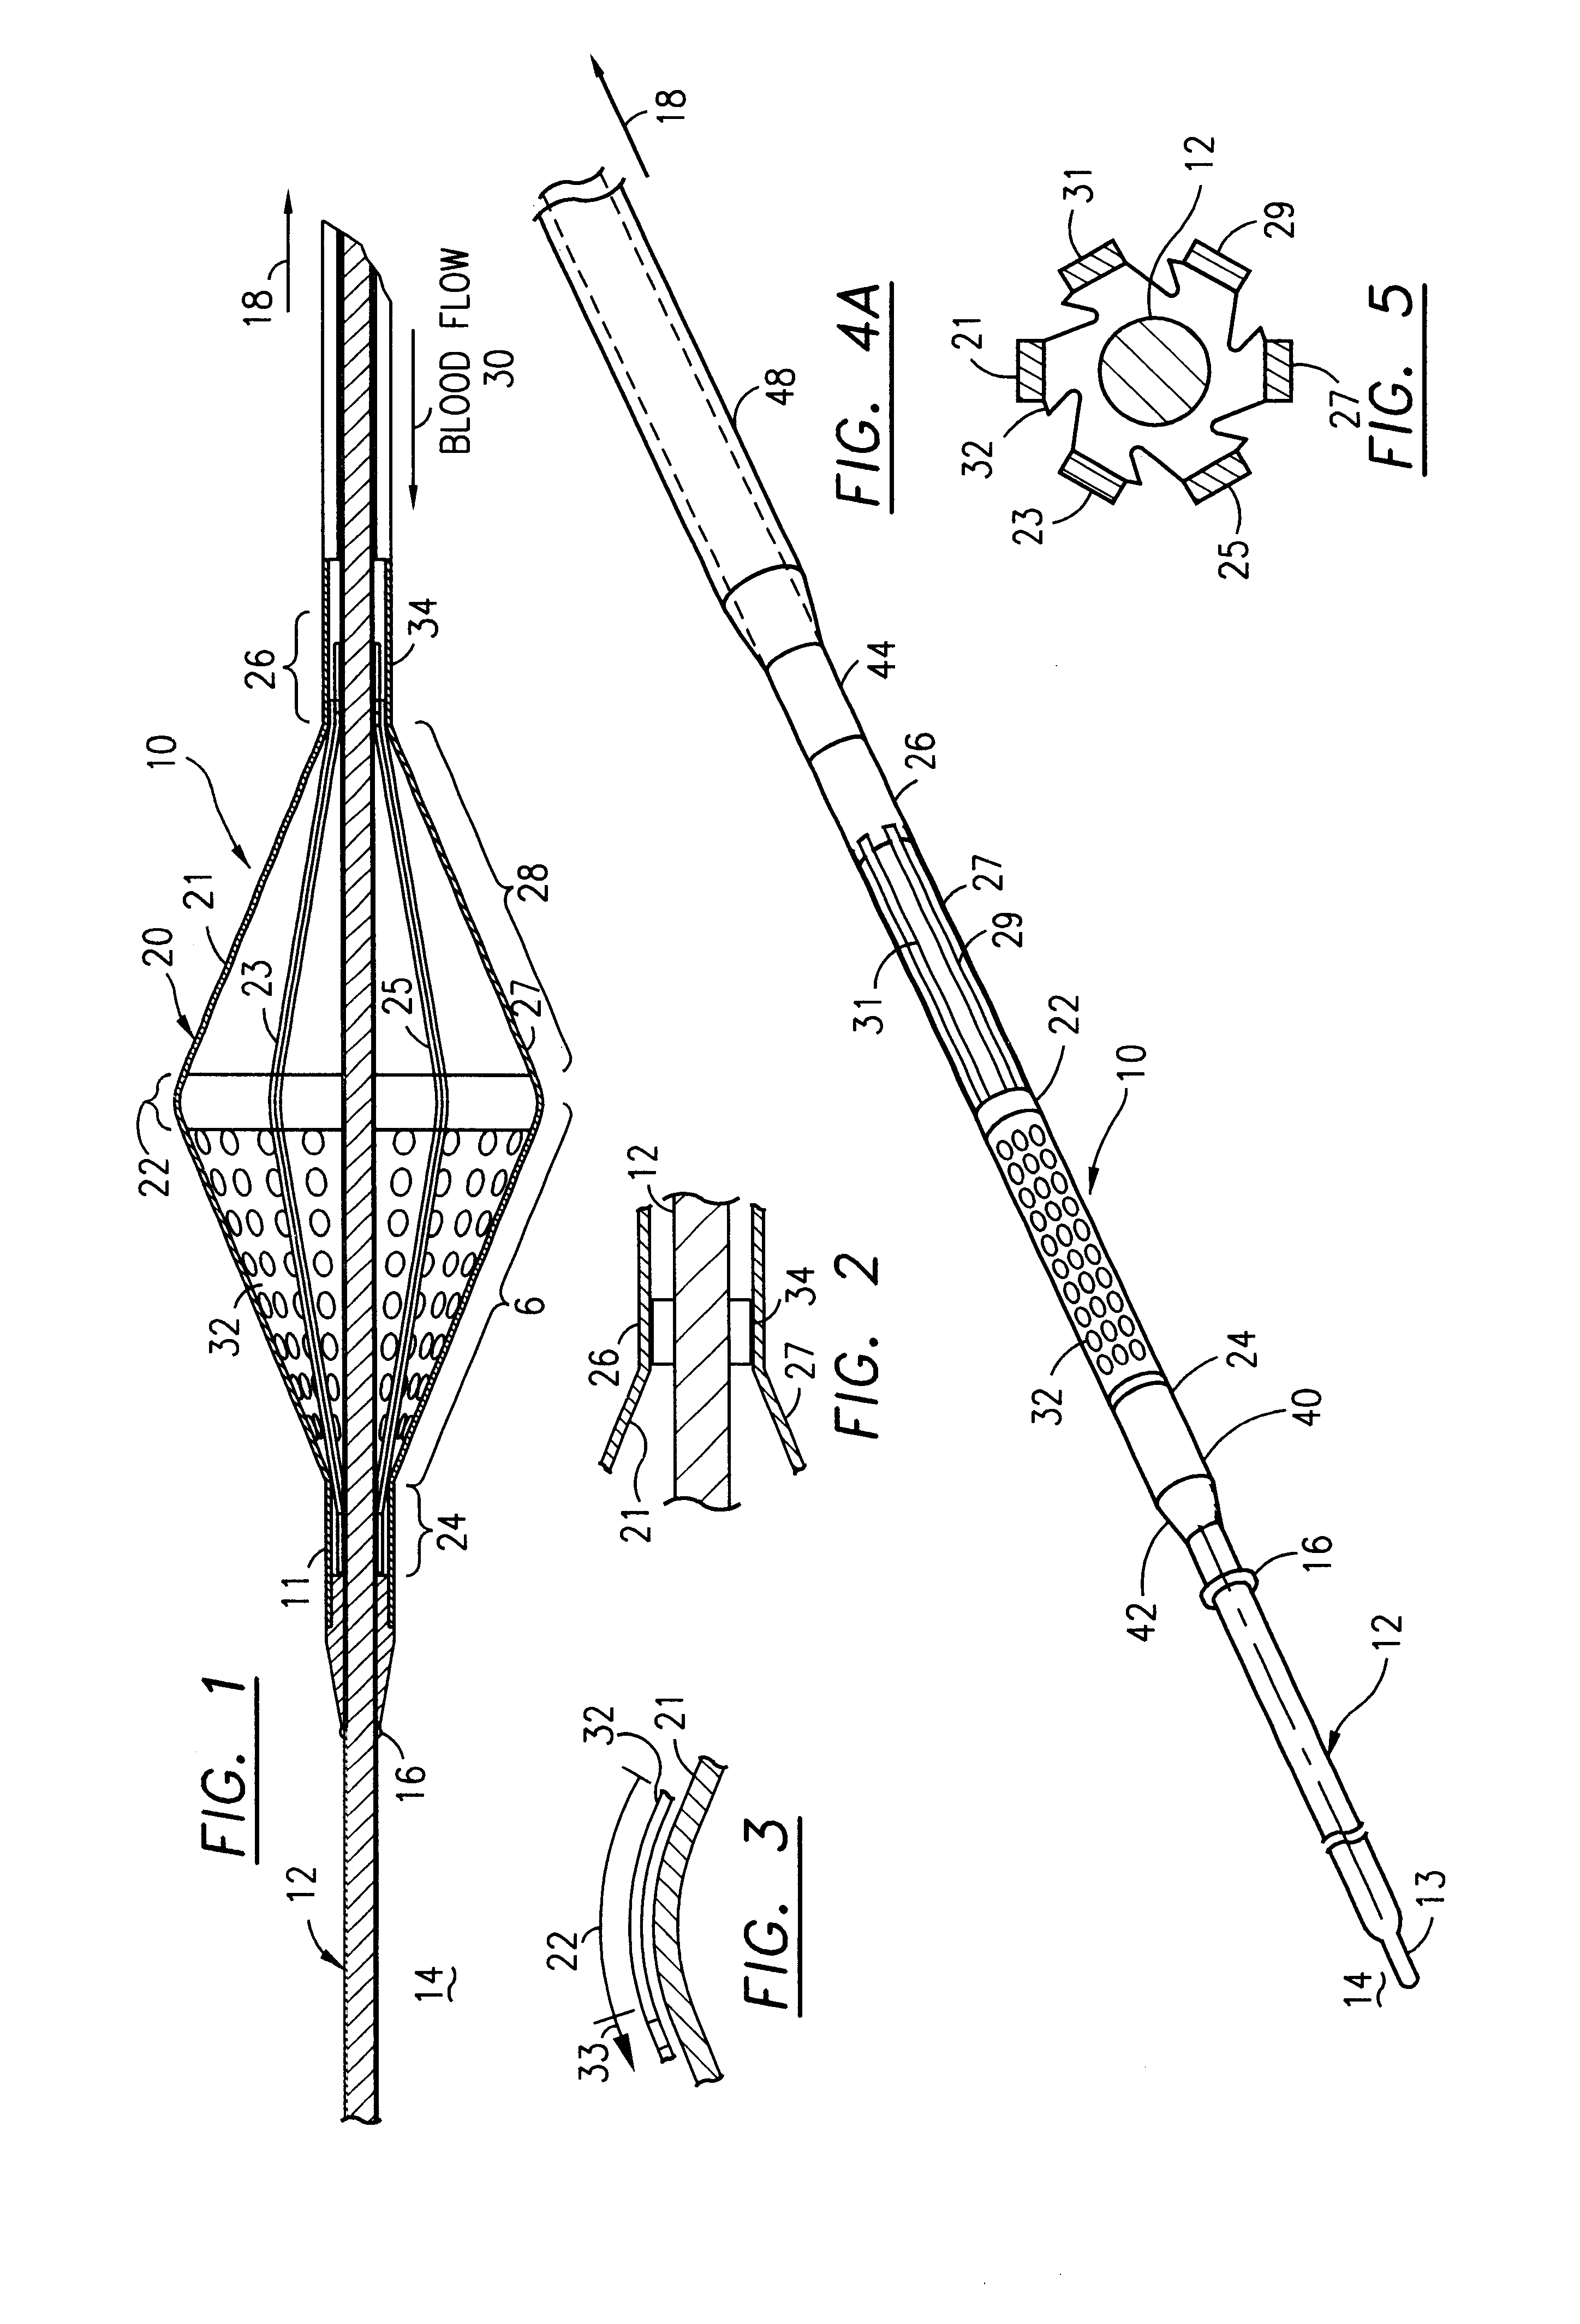 Filter for embolic material mounted on expandable frame